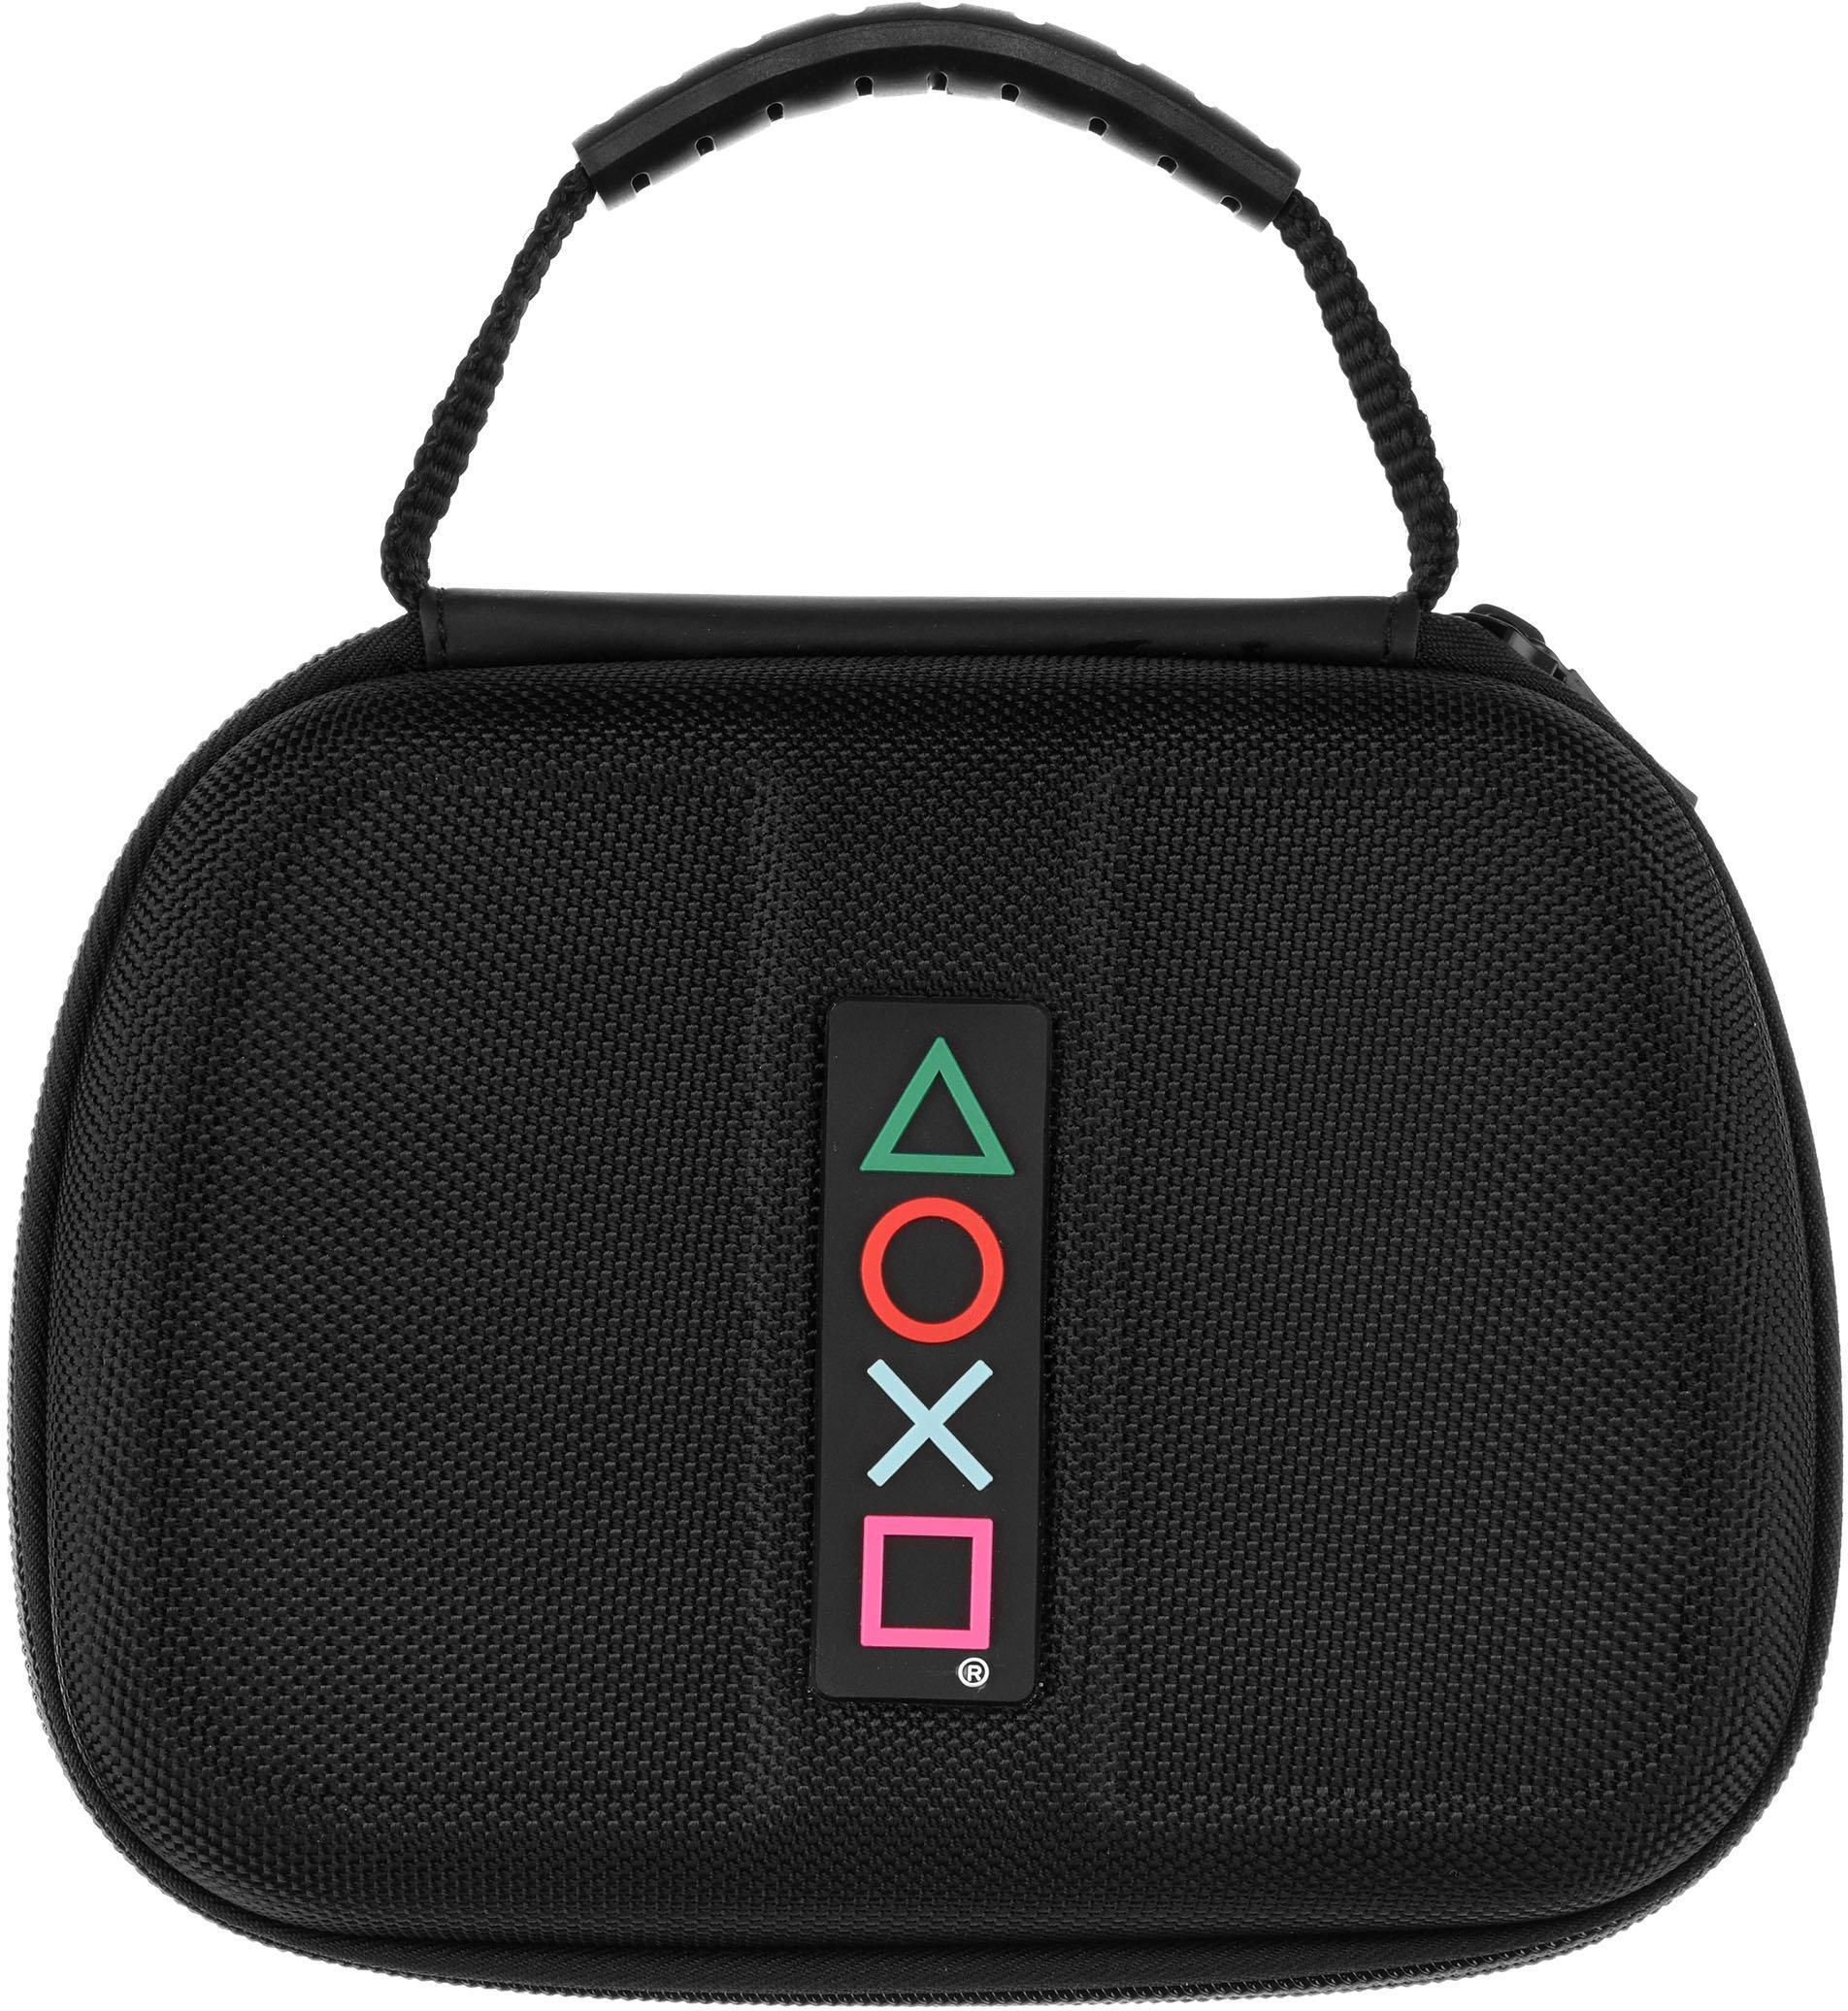 Deluxe travel case to holds and protects the PS4 controller